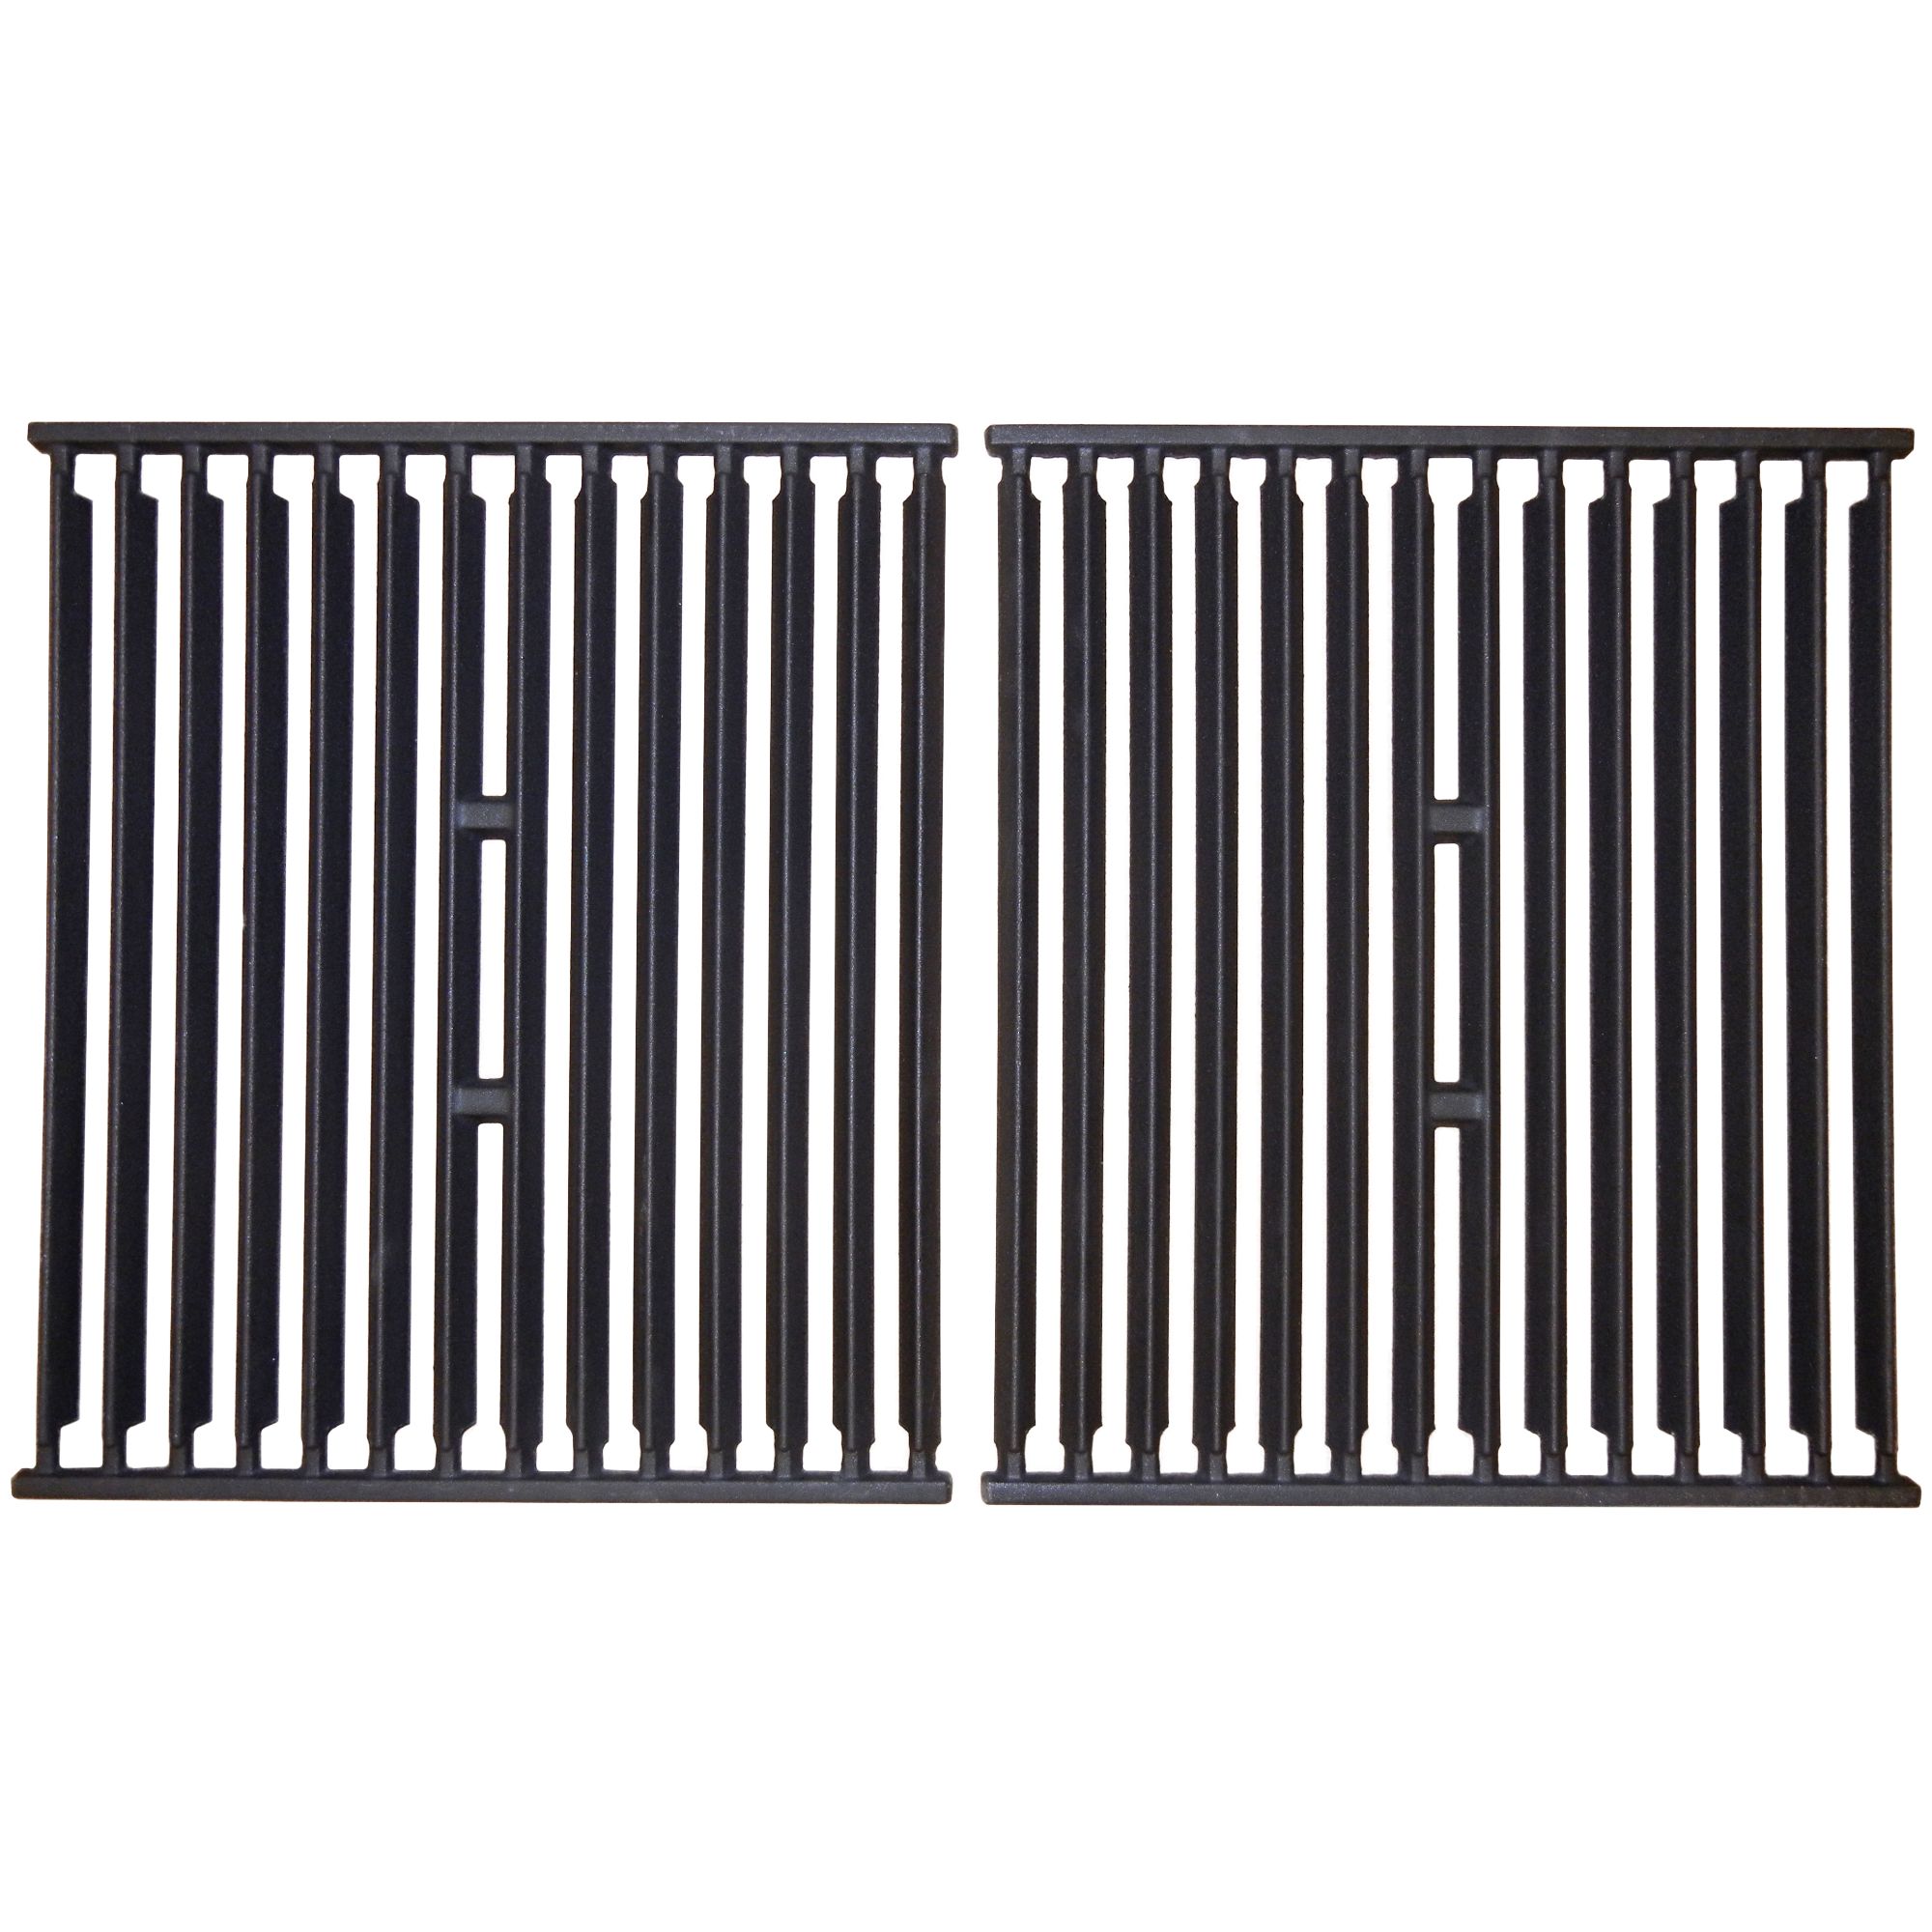 Matte cast iron cooking grid for Broil King, Broil-Mate, Huntington, Silver Chef, Sterling brand gas grills